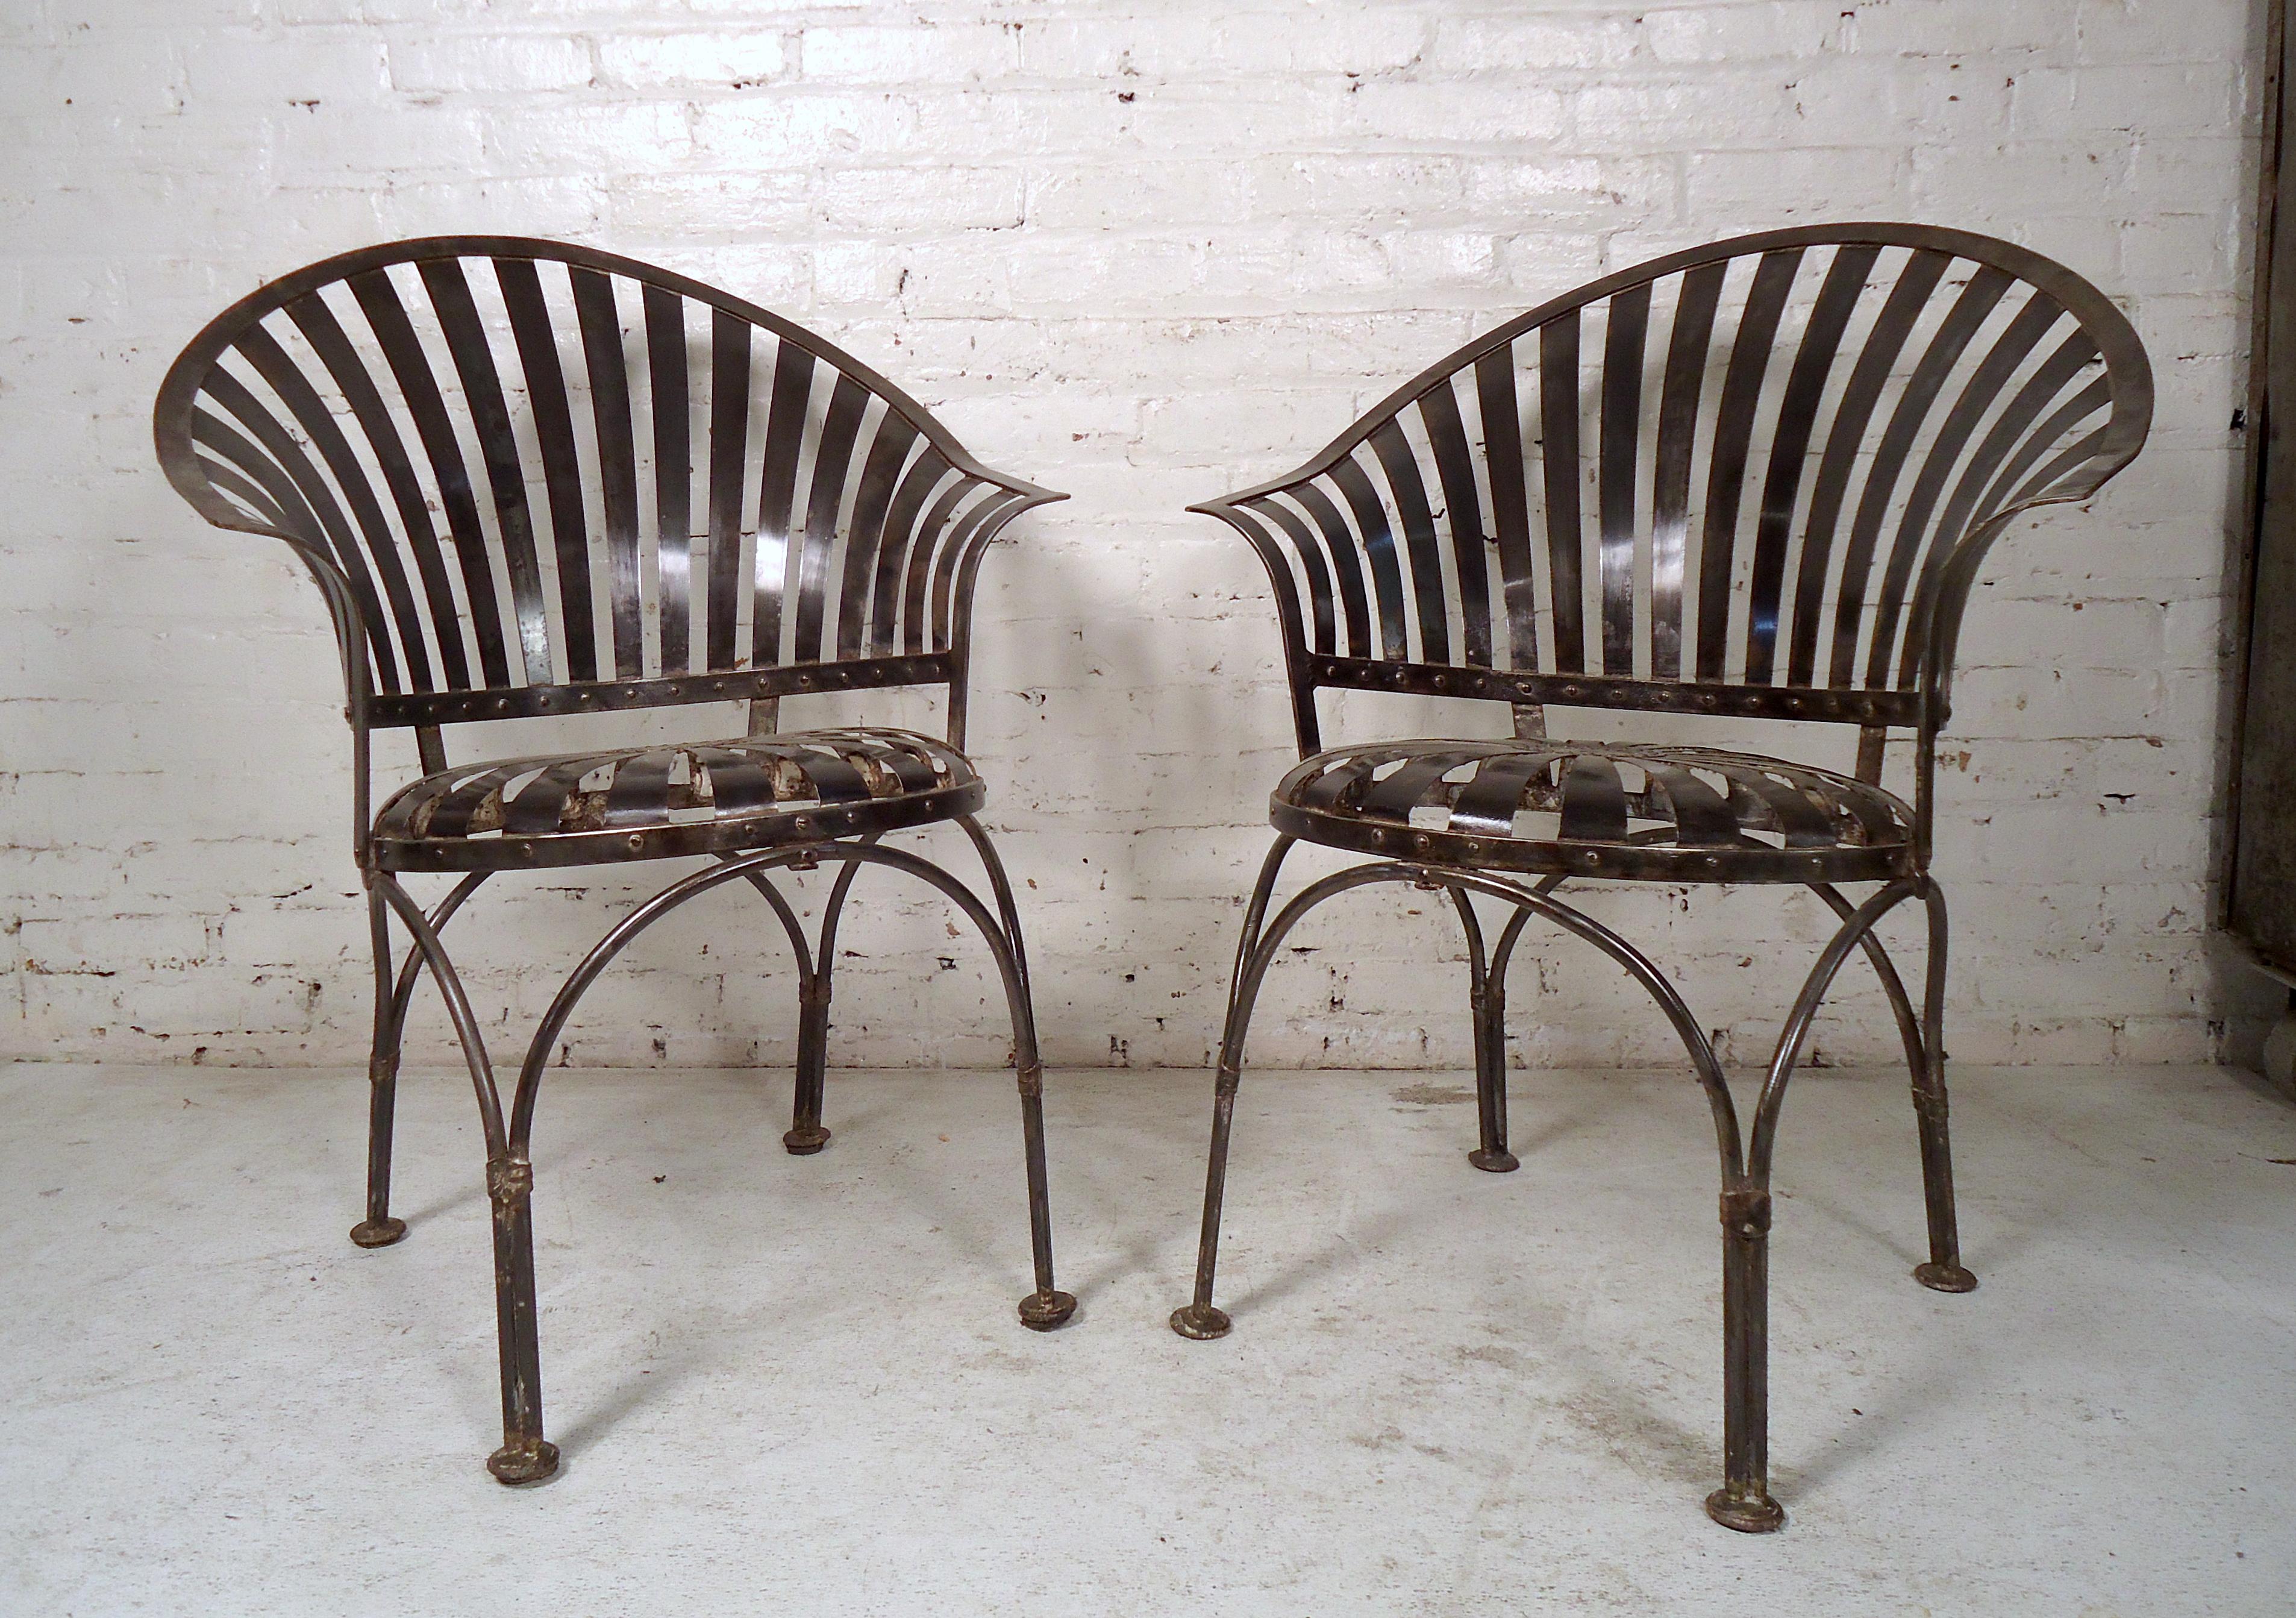 Vintage industrial metal chairs featuring a bent metal slat back, round seat, and sturdy legs in a bare metal finish.

(Please confirm item location, NY or NJ, with dealer).